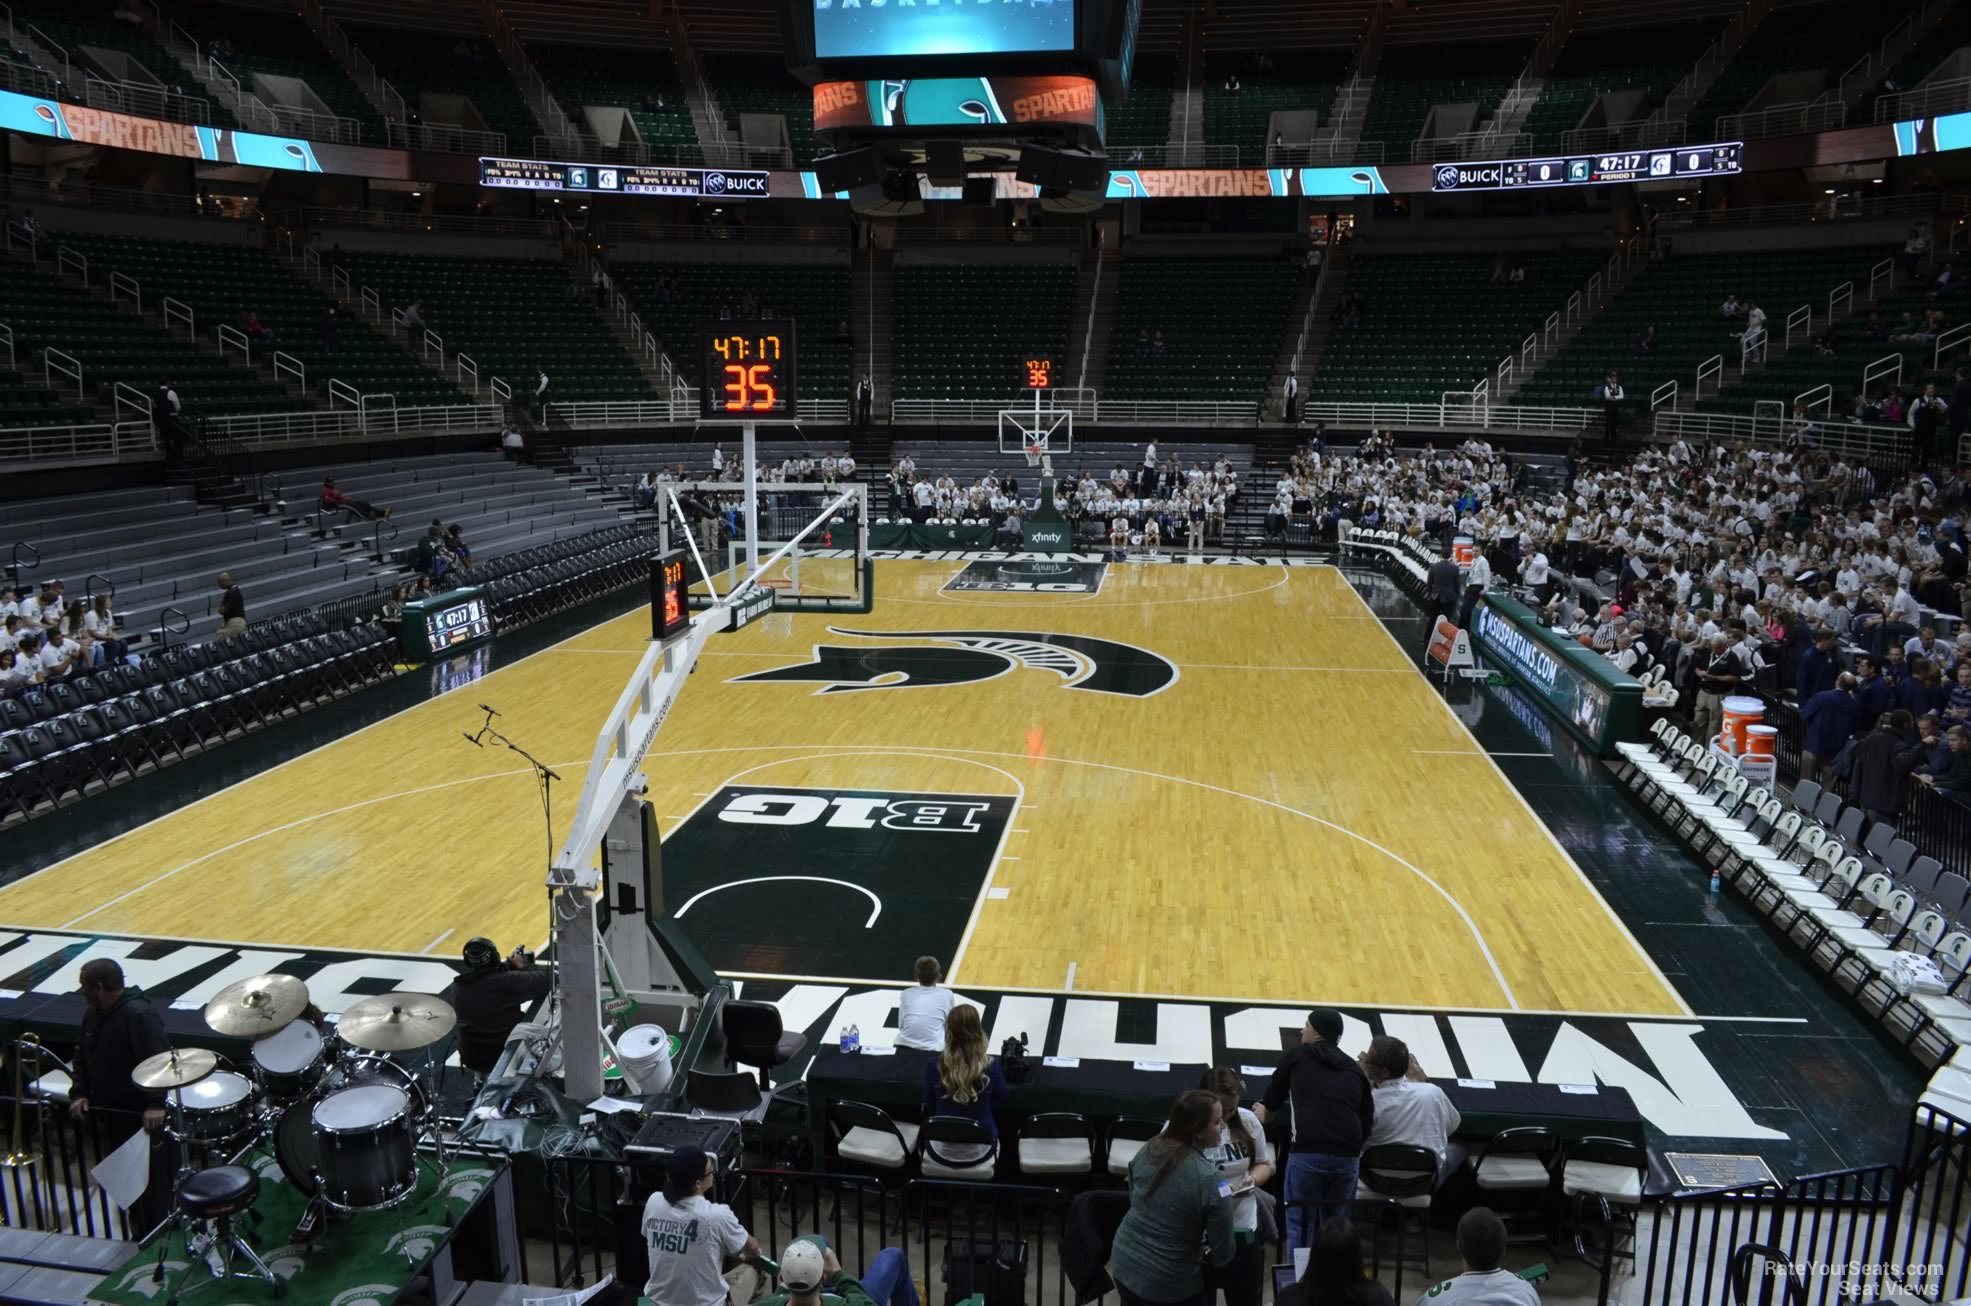 section 118, row 13 seat view  - breslin center